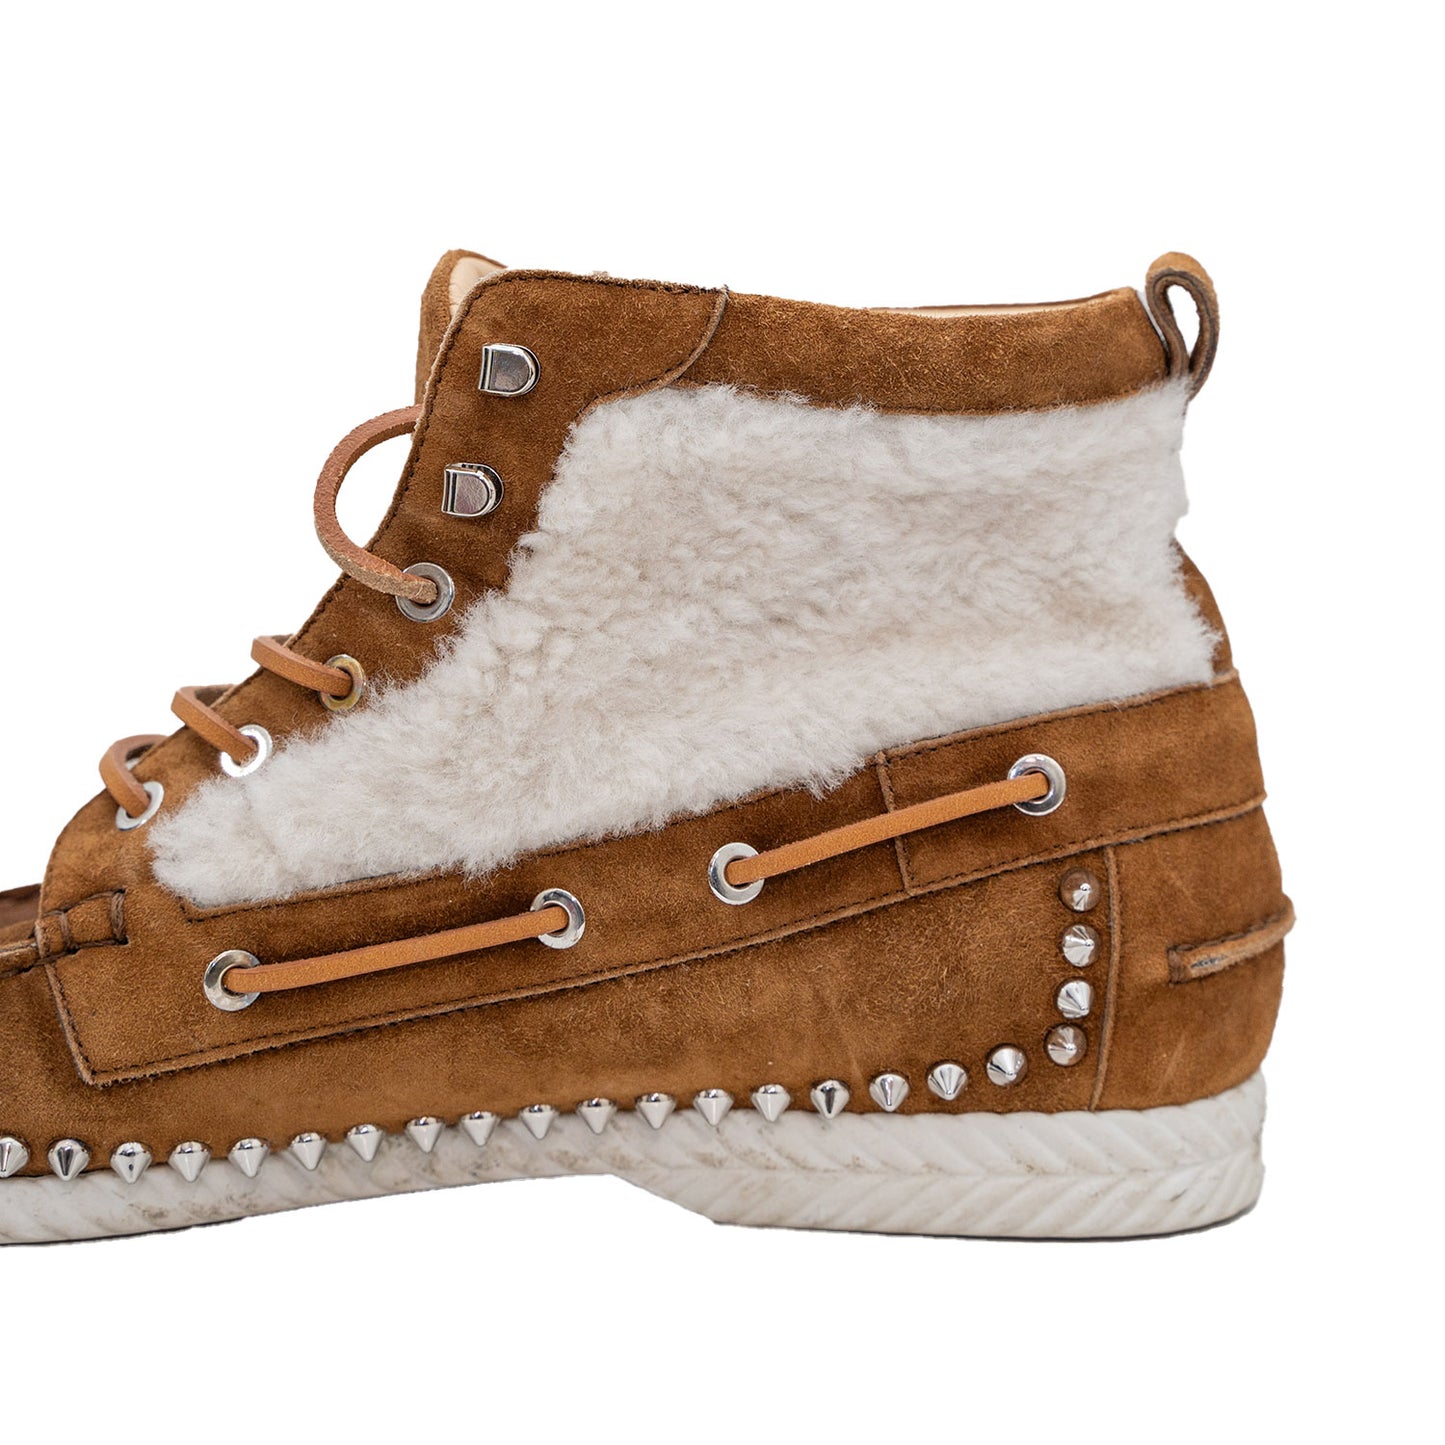 Christian Louboutin Men's Suede Fur Spiked Mid-Top Sneaker